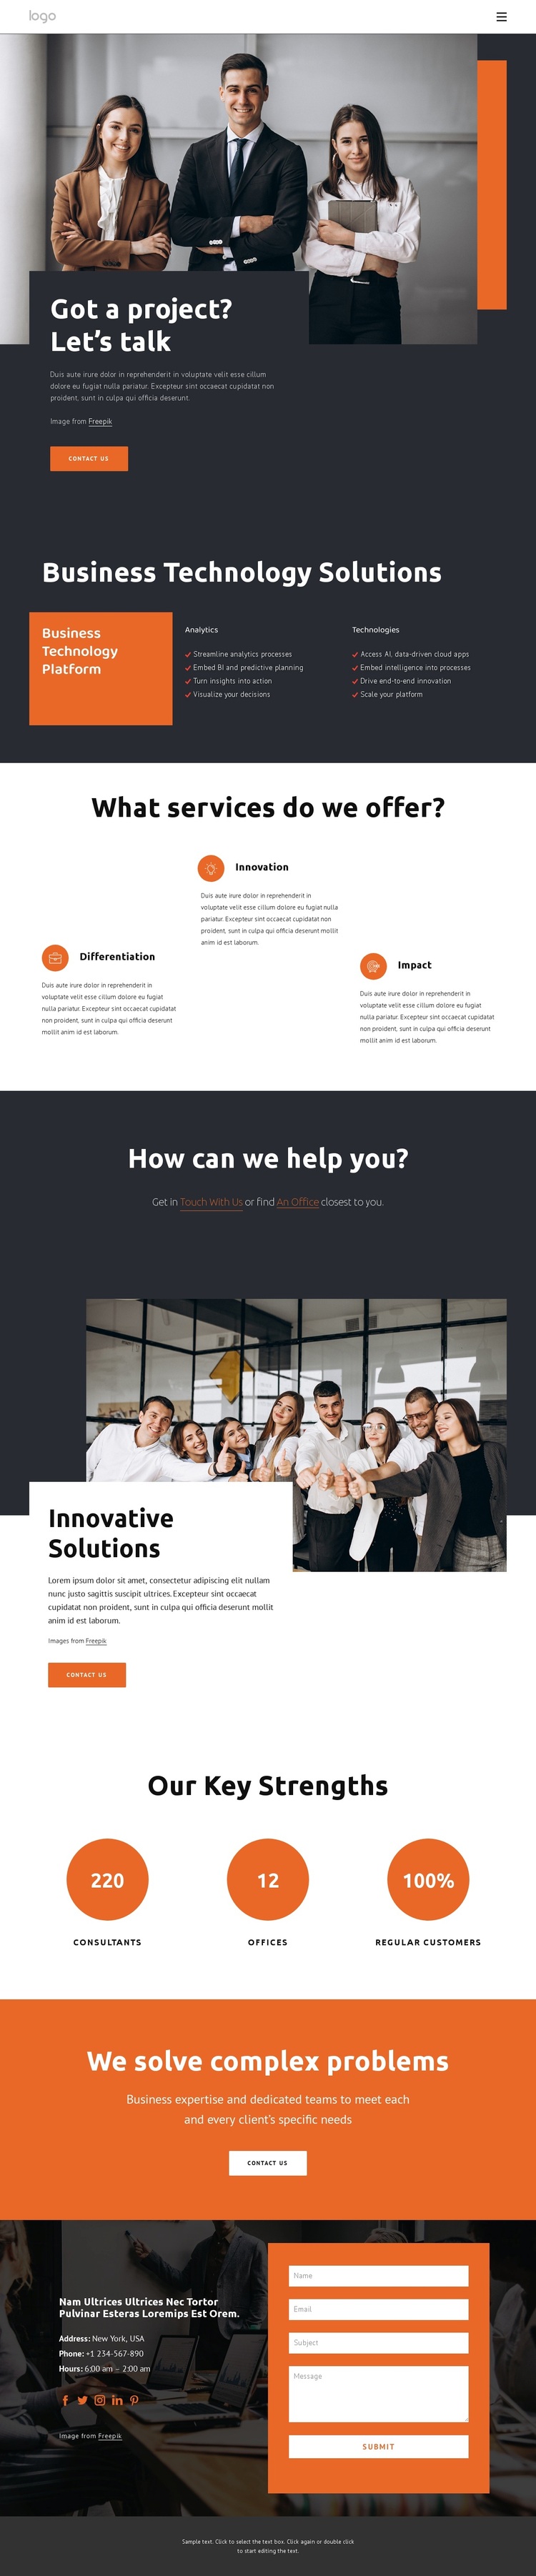 One of the best-known firms Template